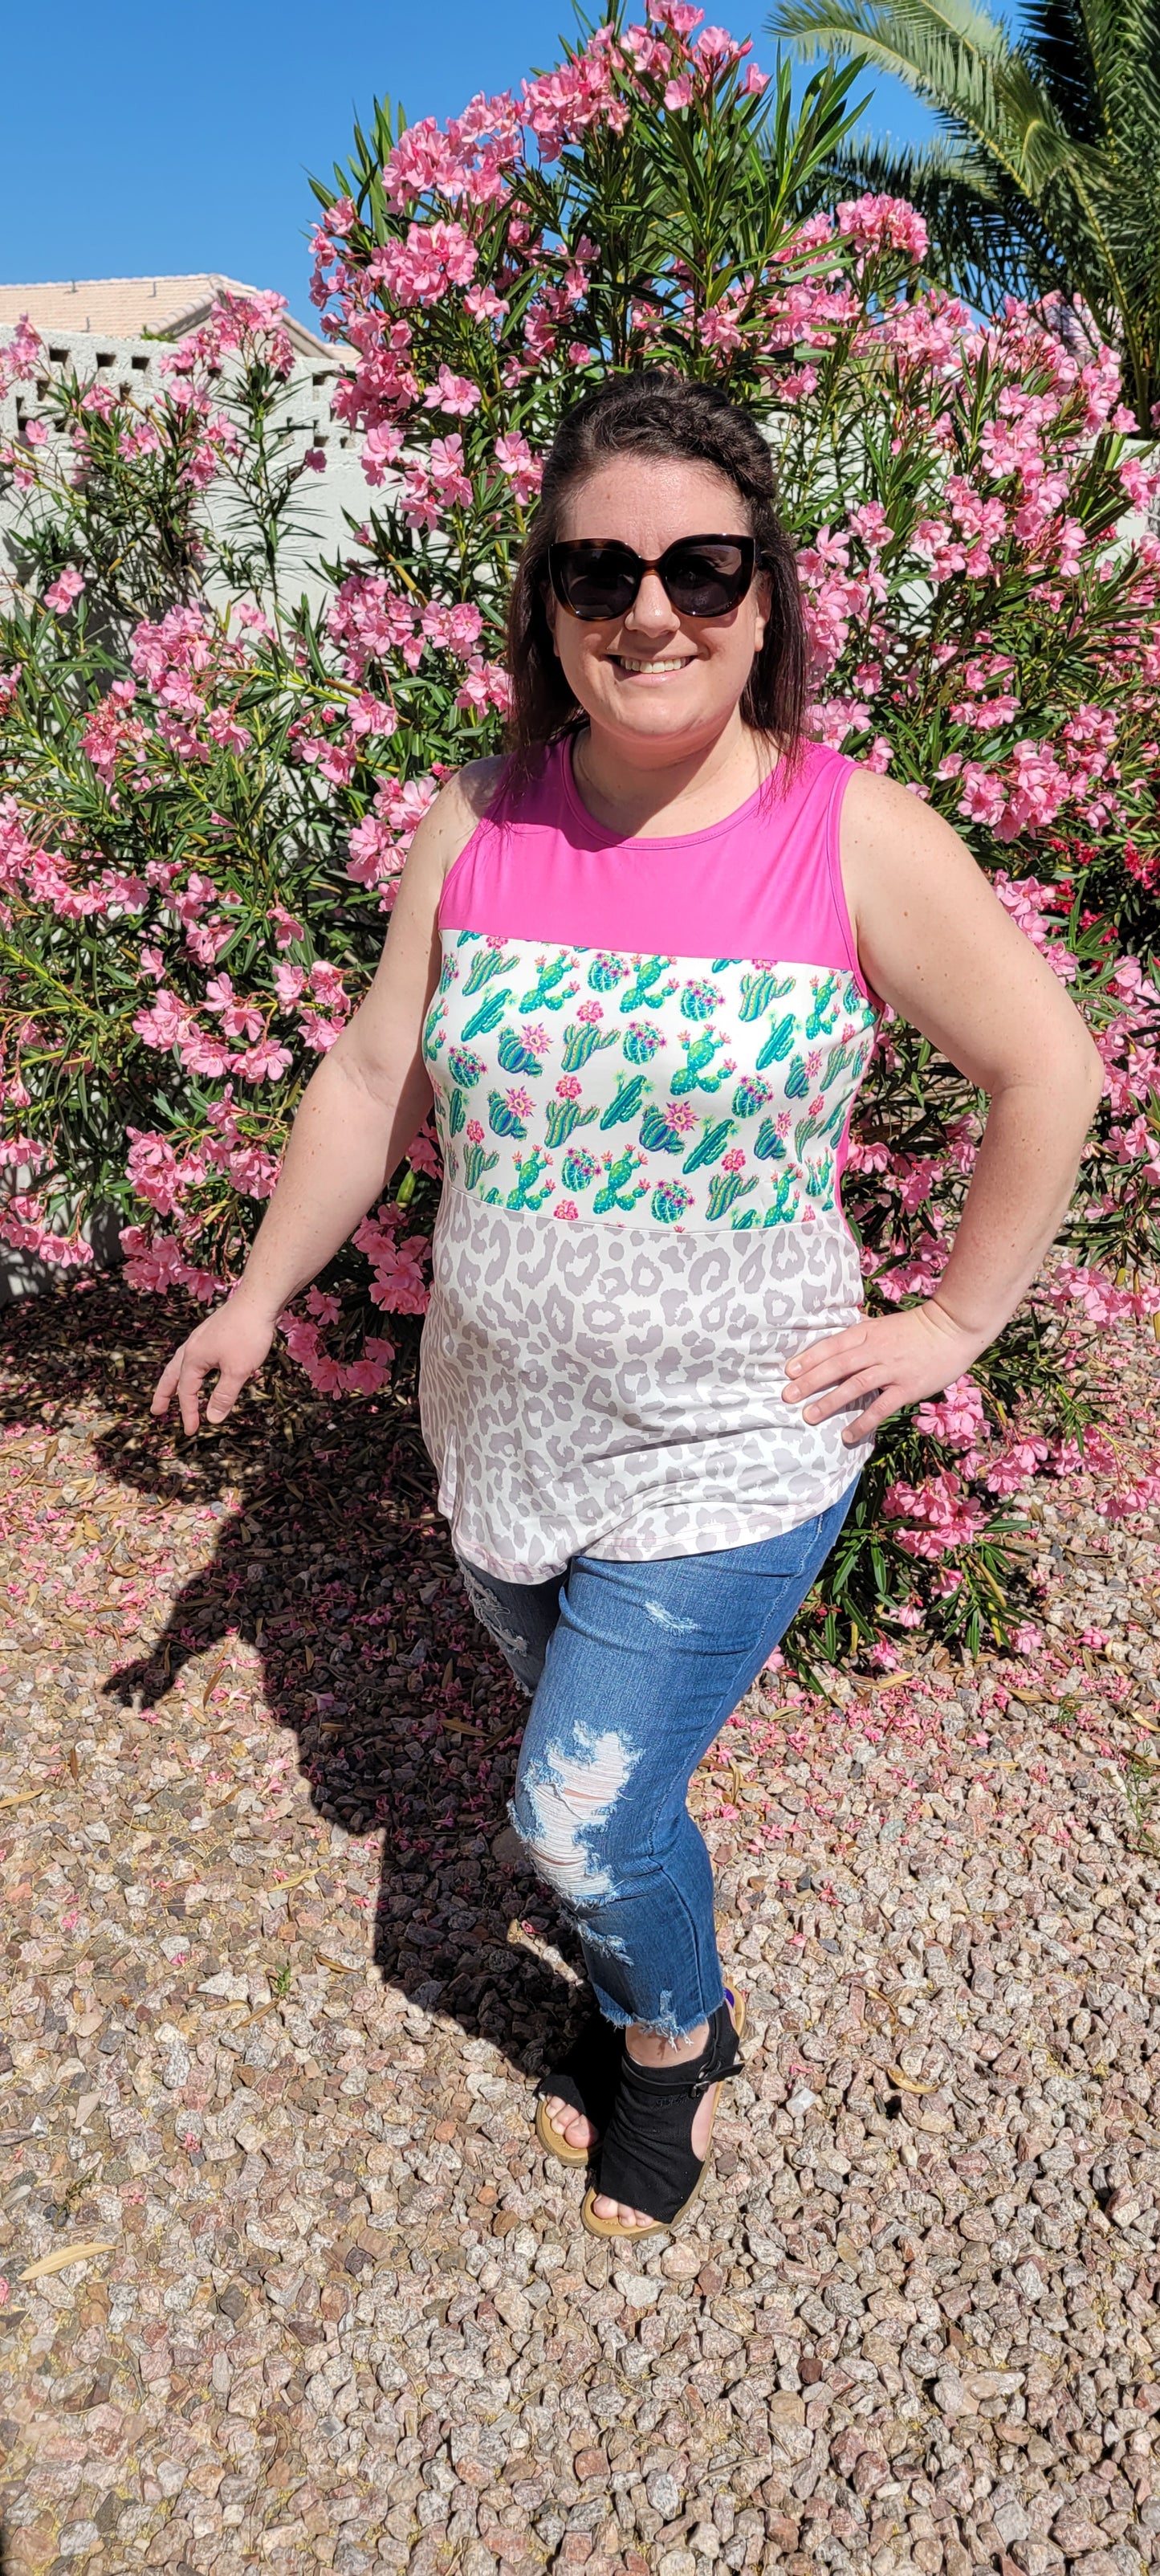 “Don’t Be A Prick” top is a sleeveless tank top, featuring a fuchsia, cactus print, and gray leopard block pattern. It has a solid fuchsia back, scoop neckline, and rounded hemline. This top is buttery soft and has stretch. What a cute summer top! Sizes small through large.